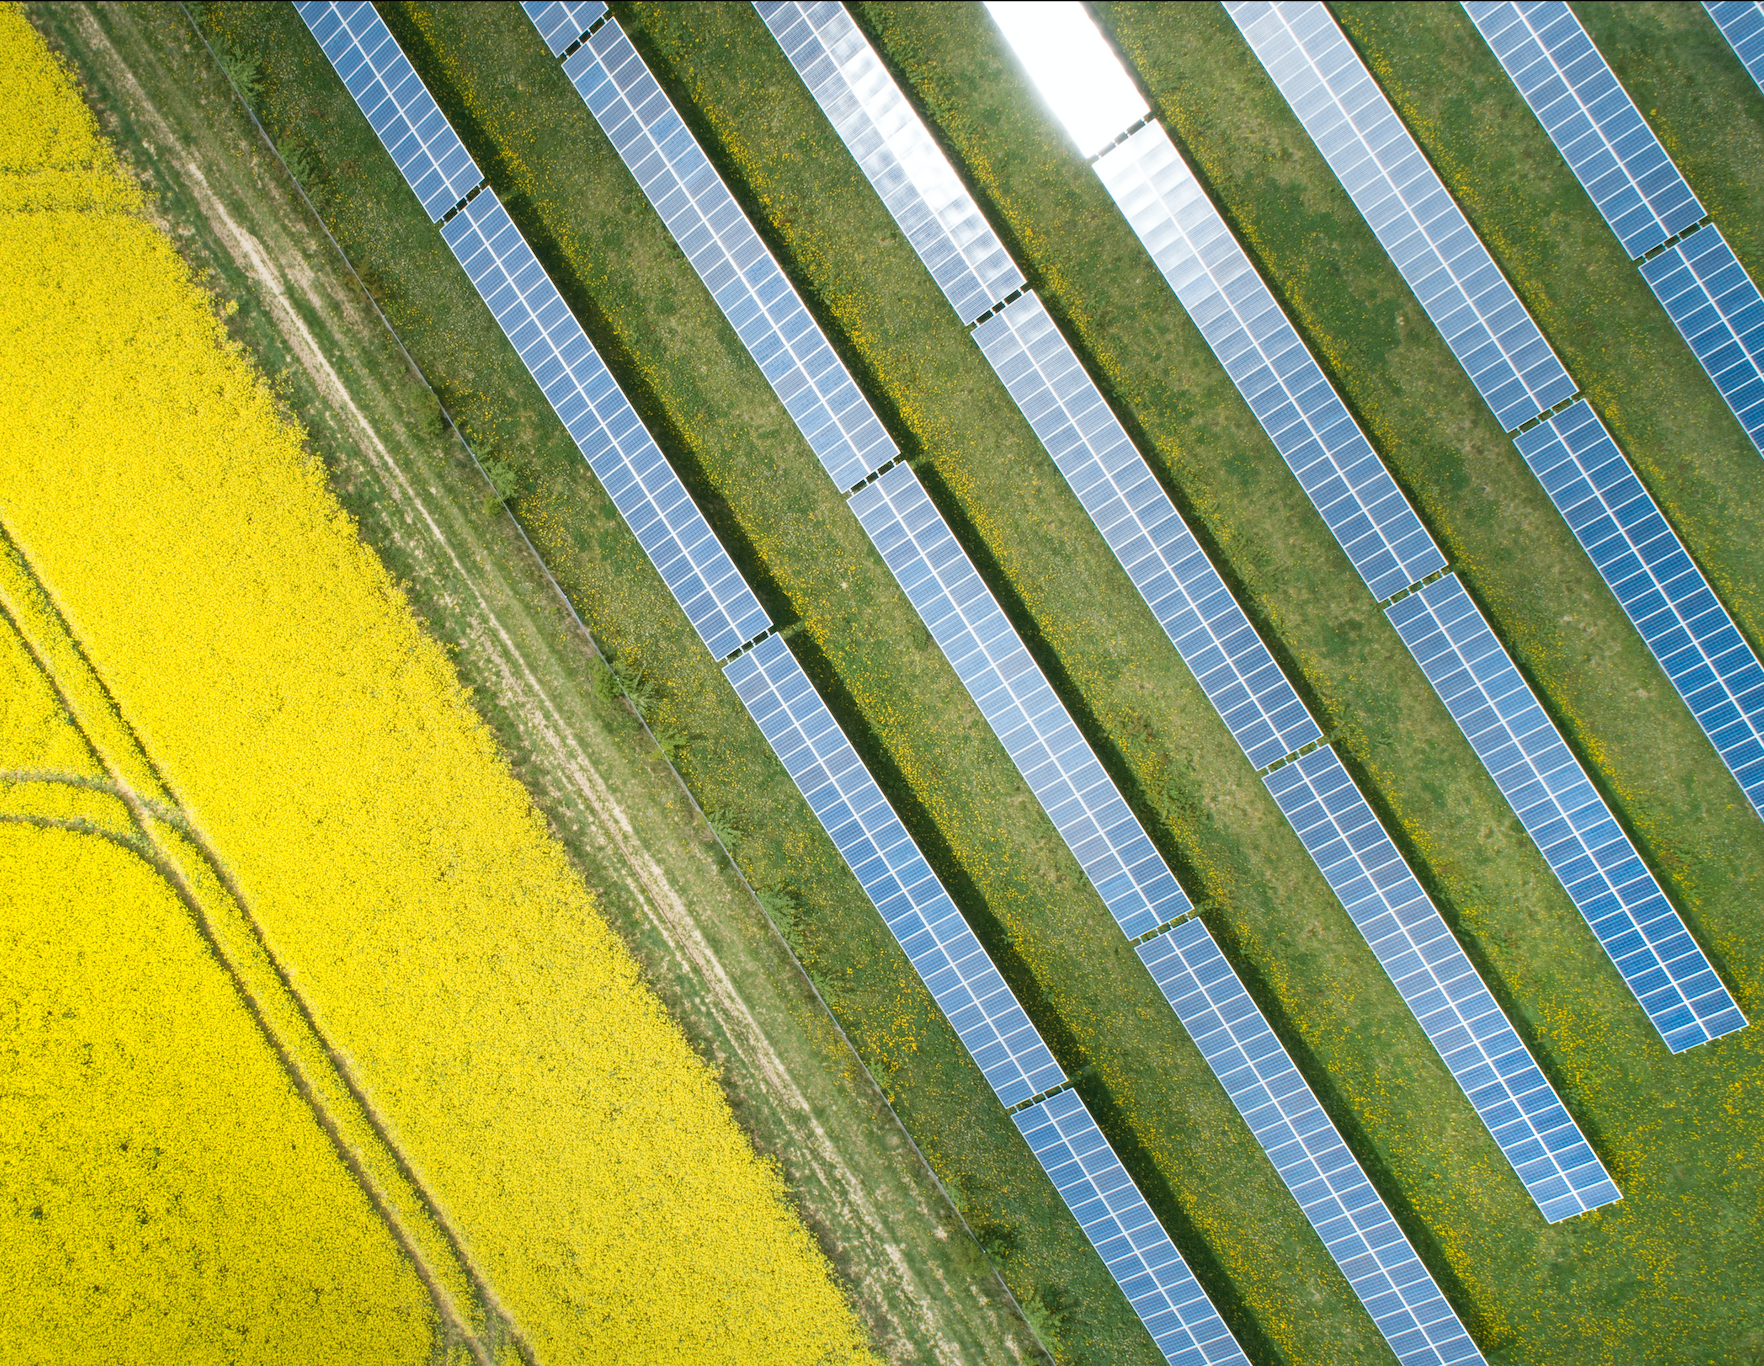 field of yellow flowers next to lines of solar panels